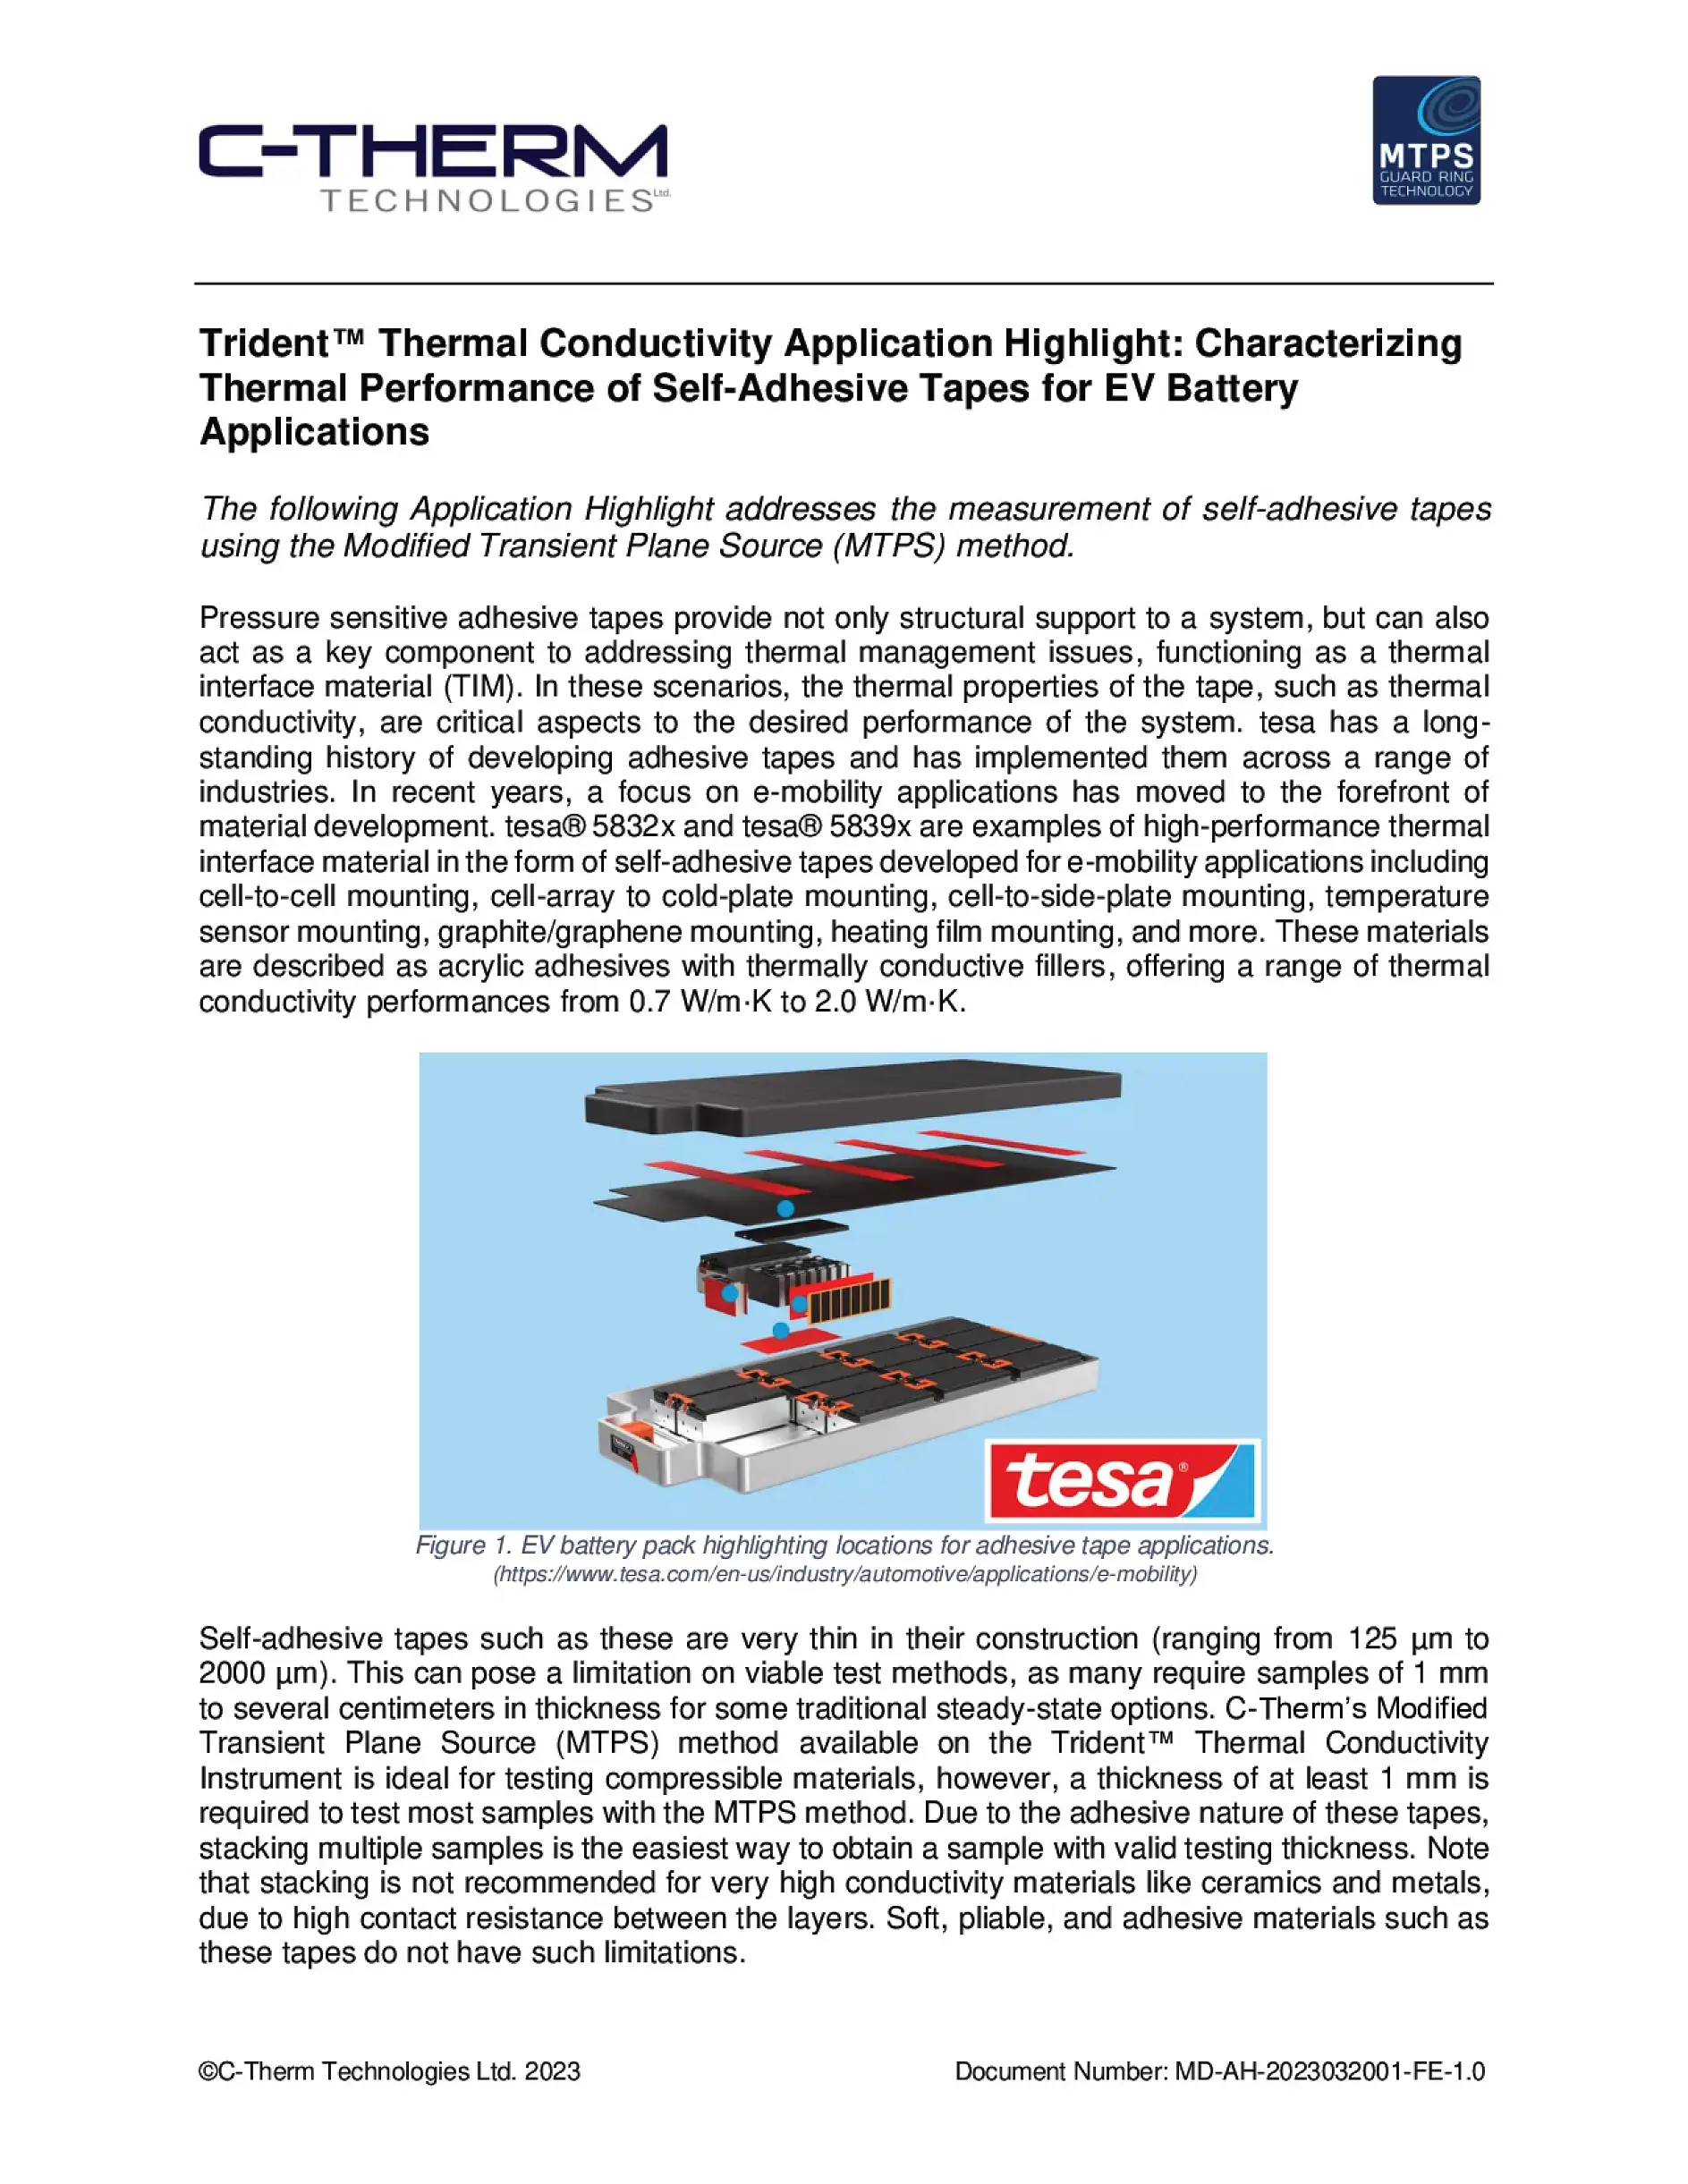 Trident™ Thermal Conductivity Application Highlight Characterizing Thermal Performance of Self-Adhesive Tapes for EV Battery Applications (1)